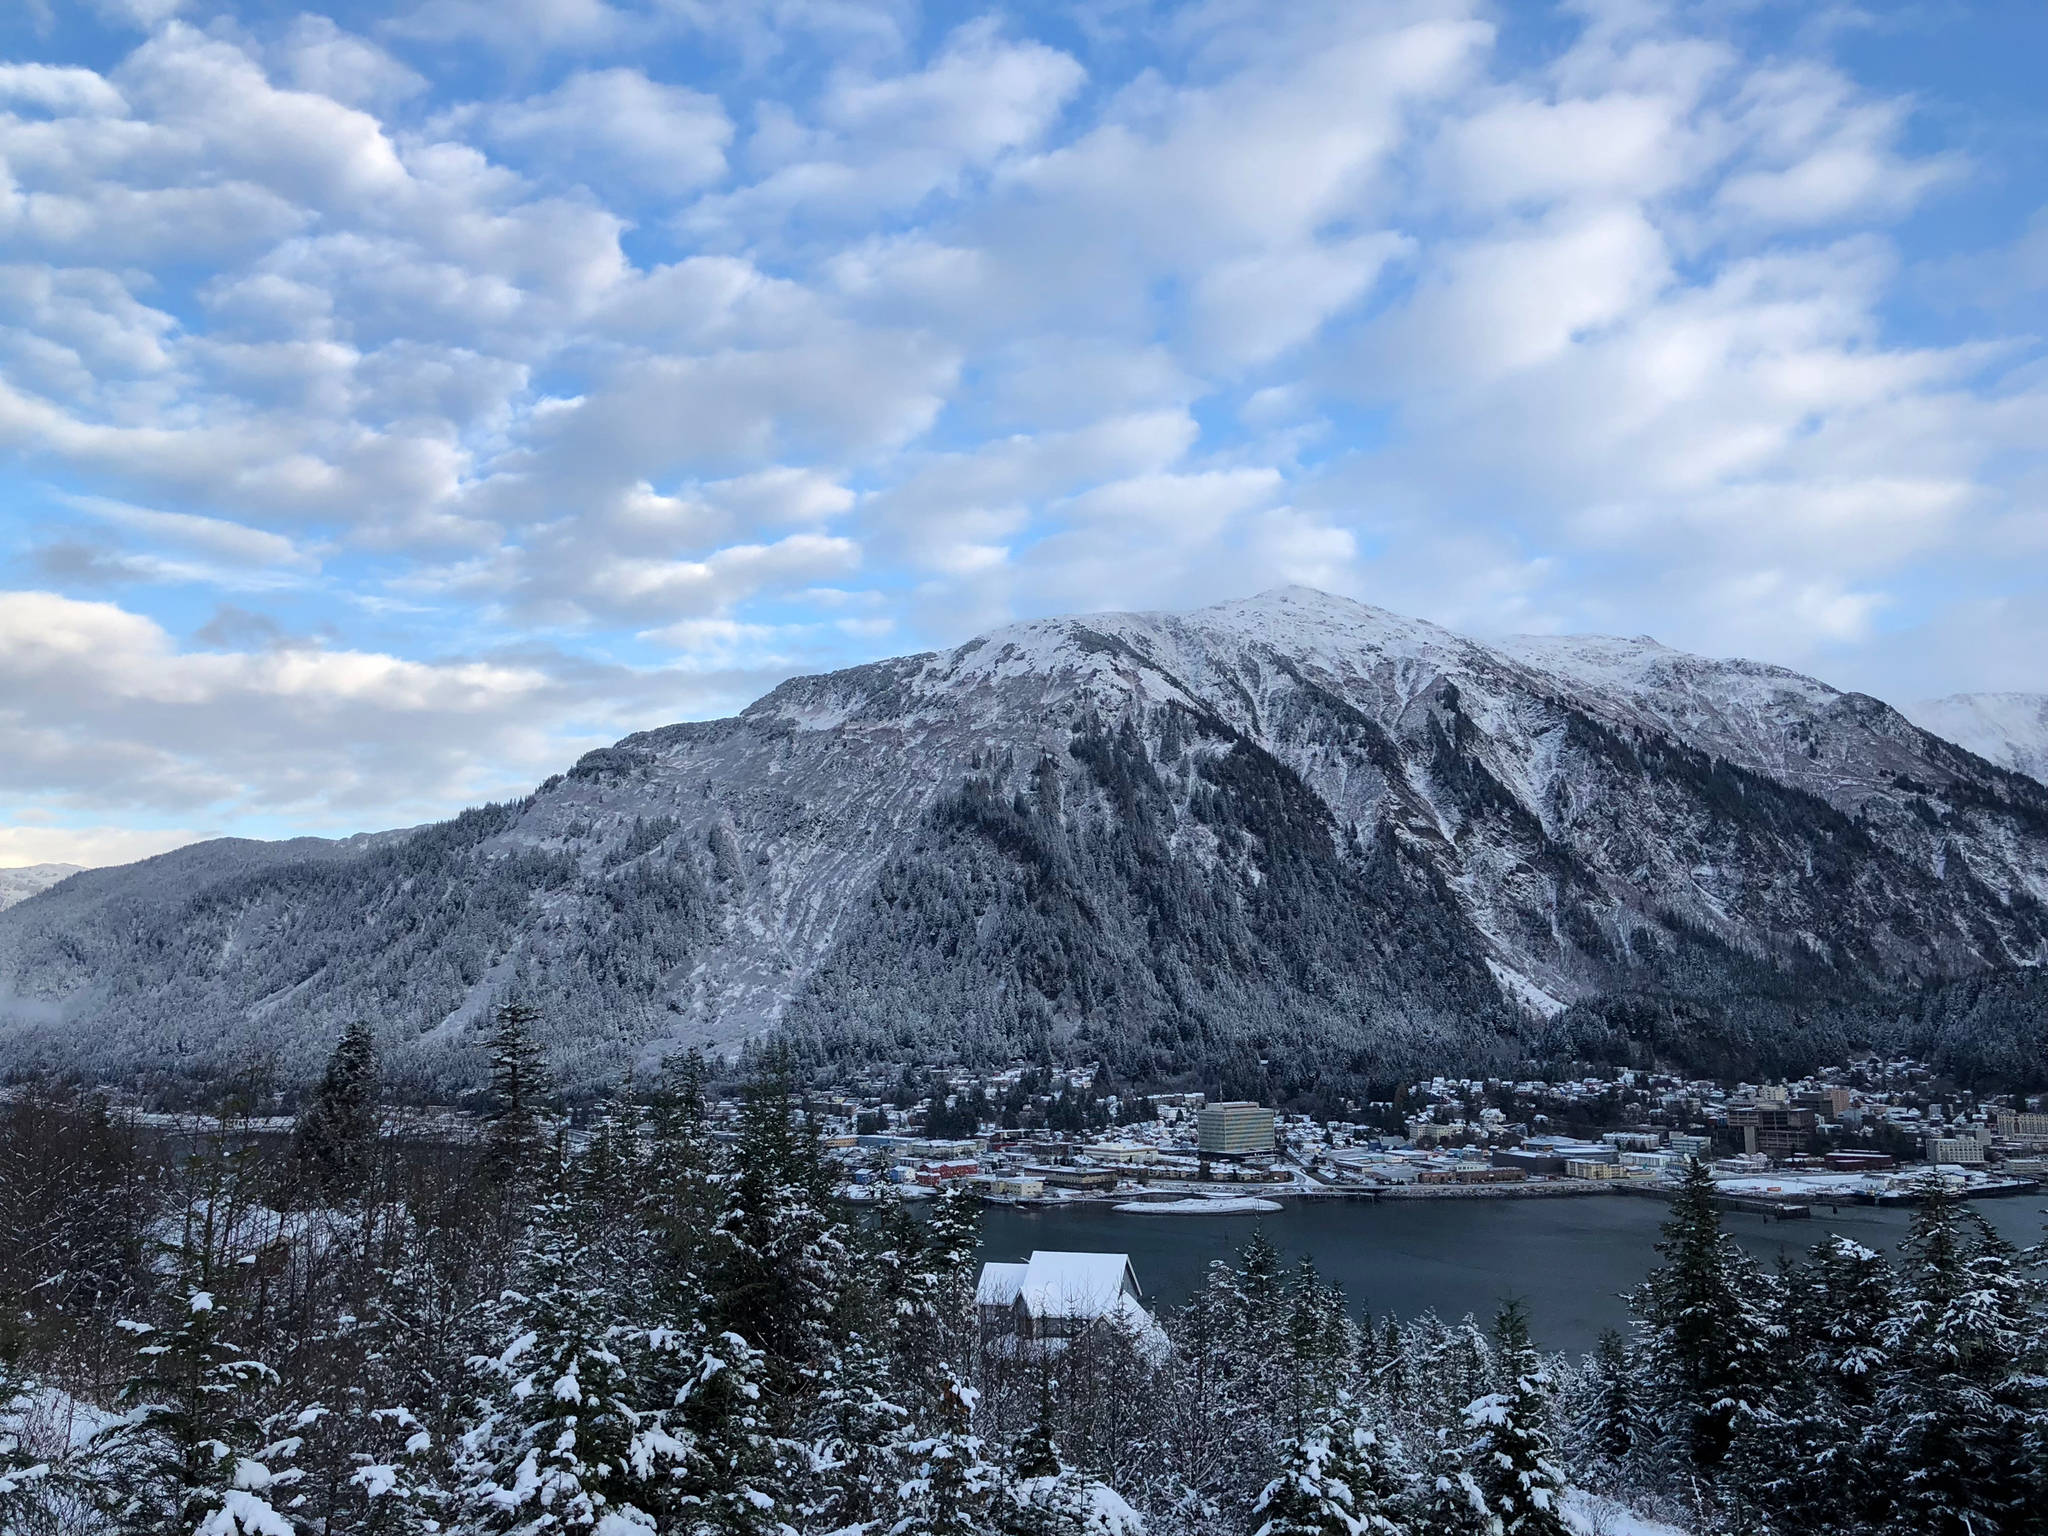 The first snow of the season covers Juneau on Saturday, Nov. 11, 2017. (Angelo Saggiomo | Juneau Empire)